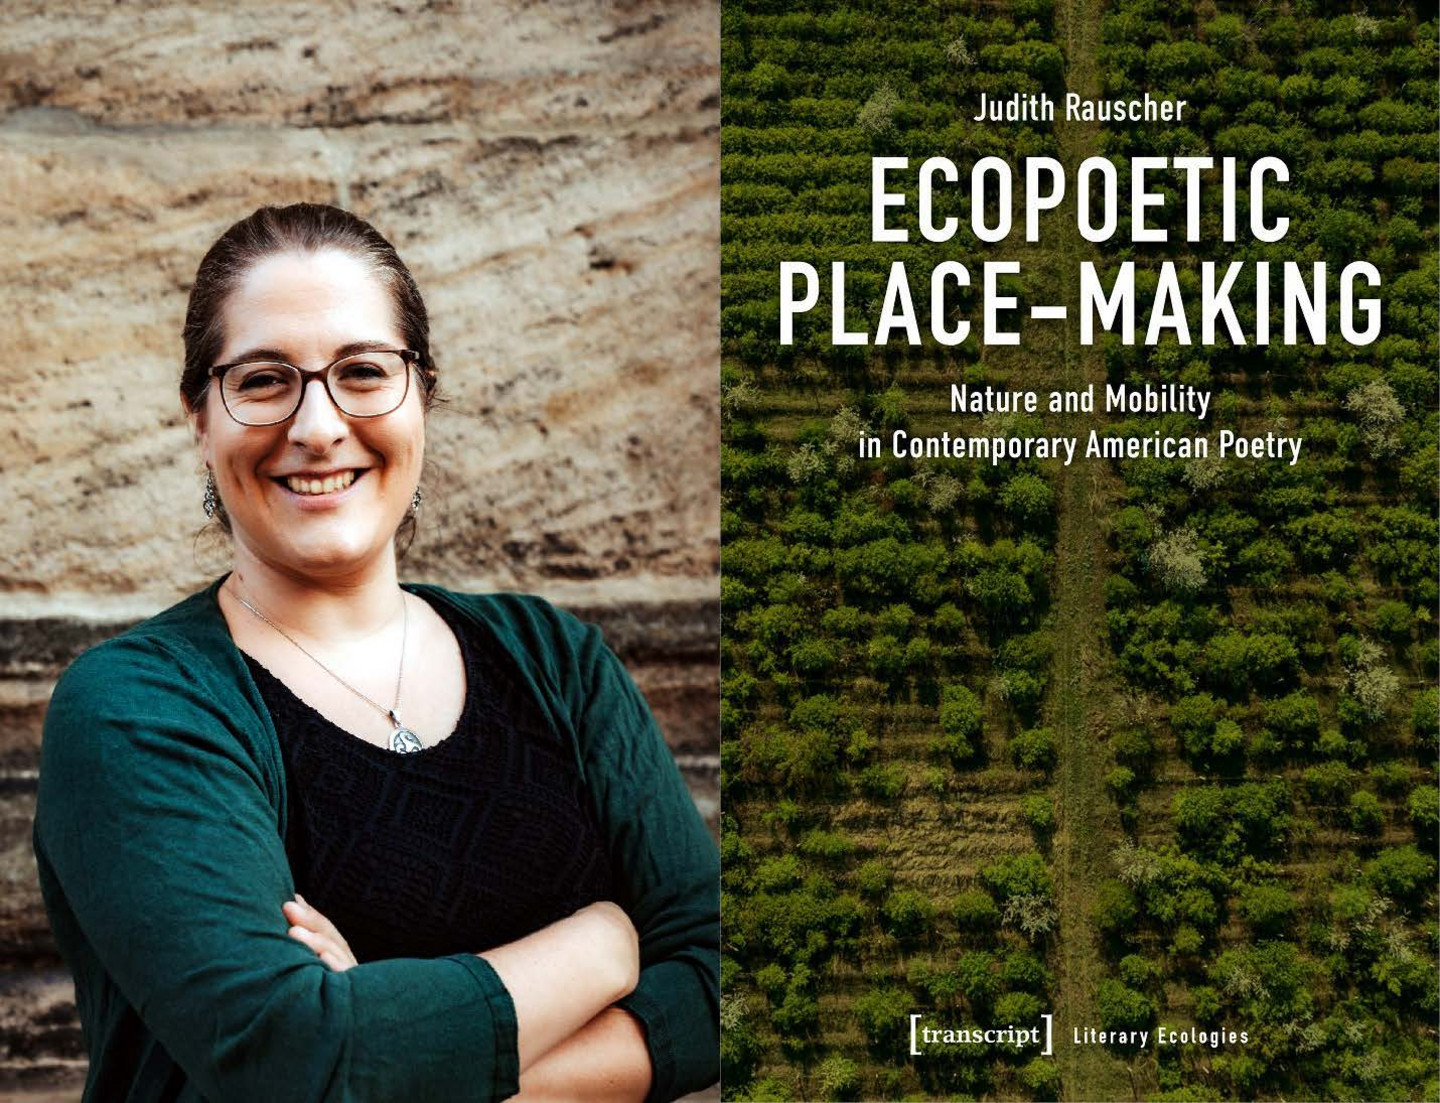 Author portrait of Judith Rauscher and Cover of the Monograph 'Poetic Place-Making'